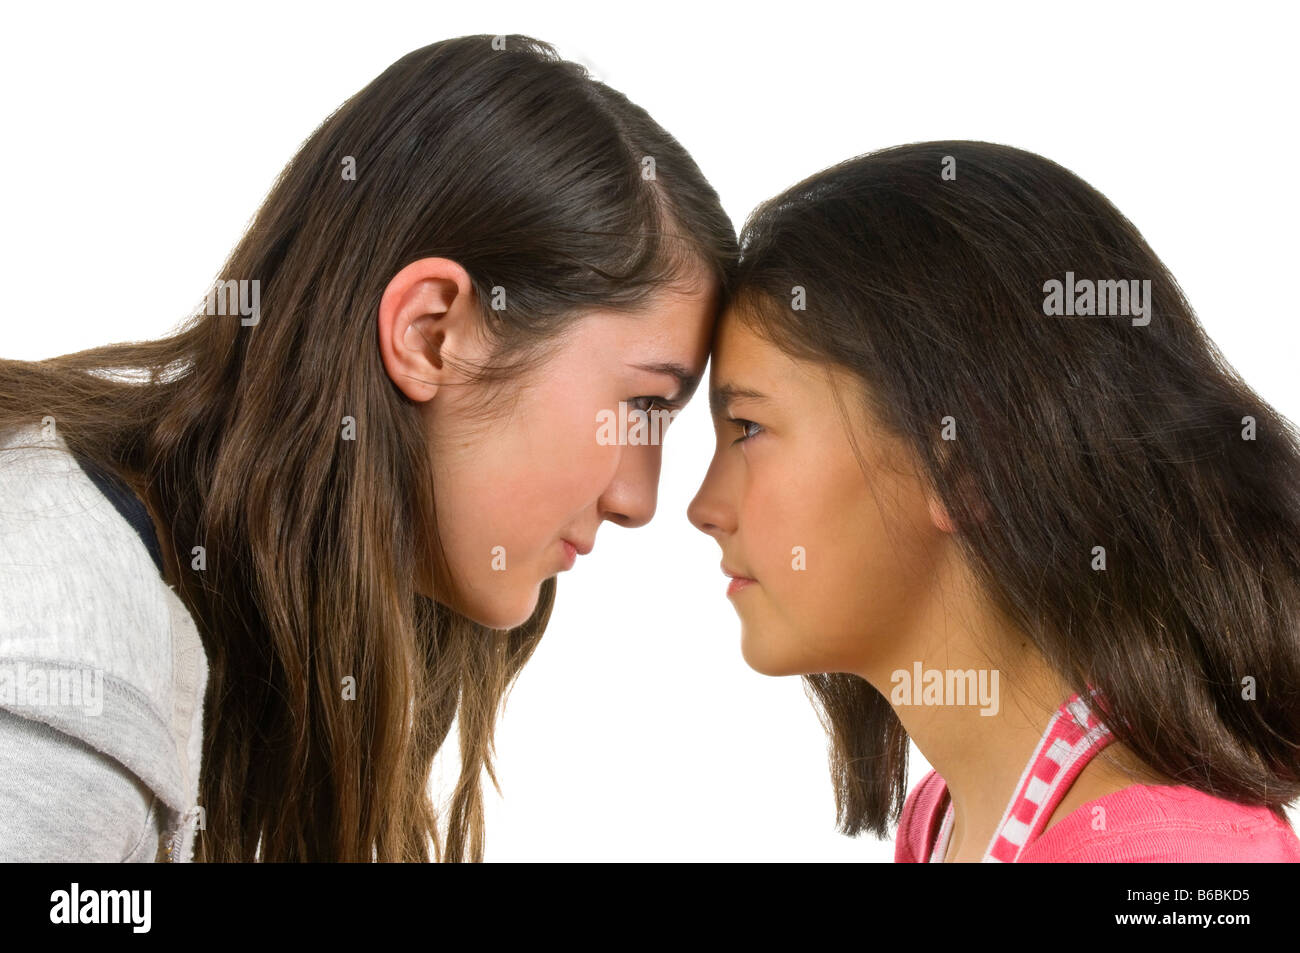 Horizontal portrait of two teenage sisters having an eyeball to eyeball confrontation during a fight against a white background. Stock Photo